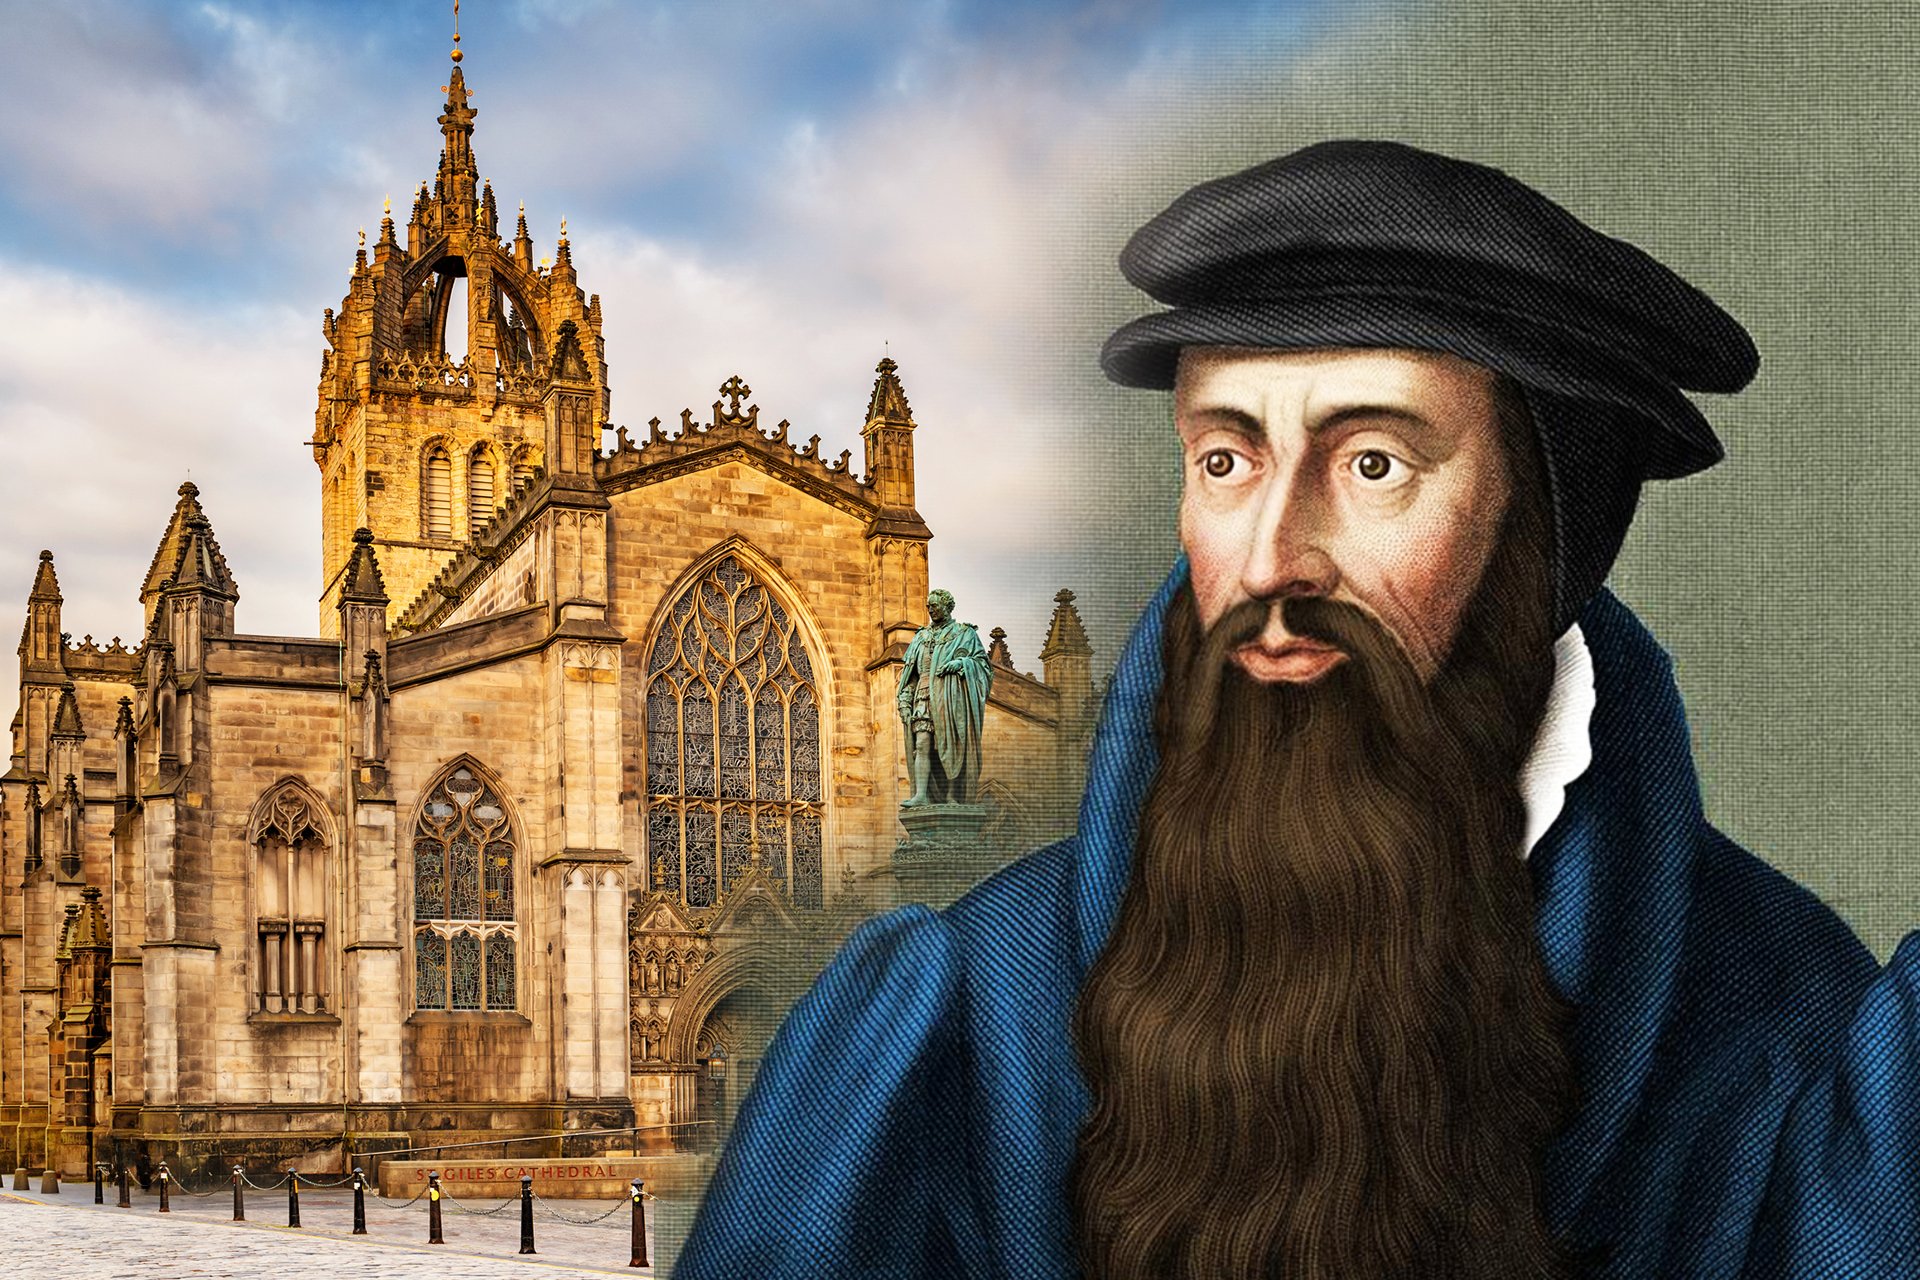 Composite image featuring the detailed facade of St Giles' Cathedral with its intricate gothic spires and stained glass windows on the left, and a close-up portrait of John Knox, depicted with a long beard and wearing a blue robe and black hat, on the right.